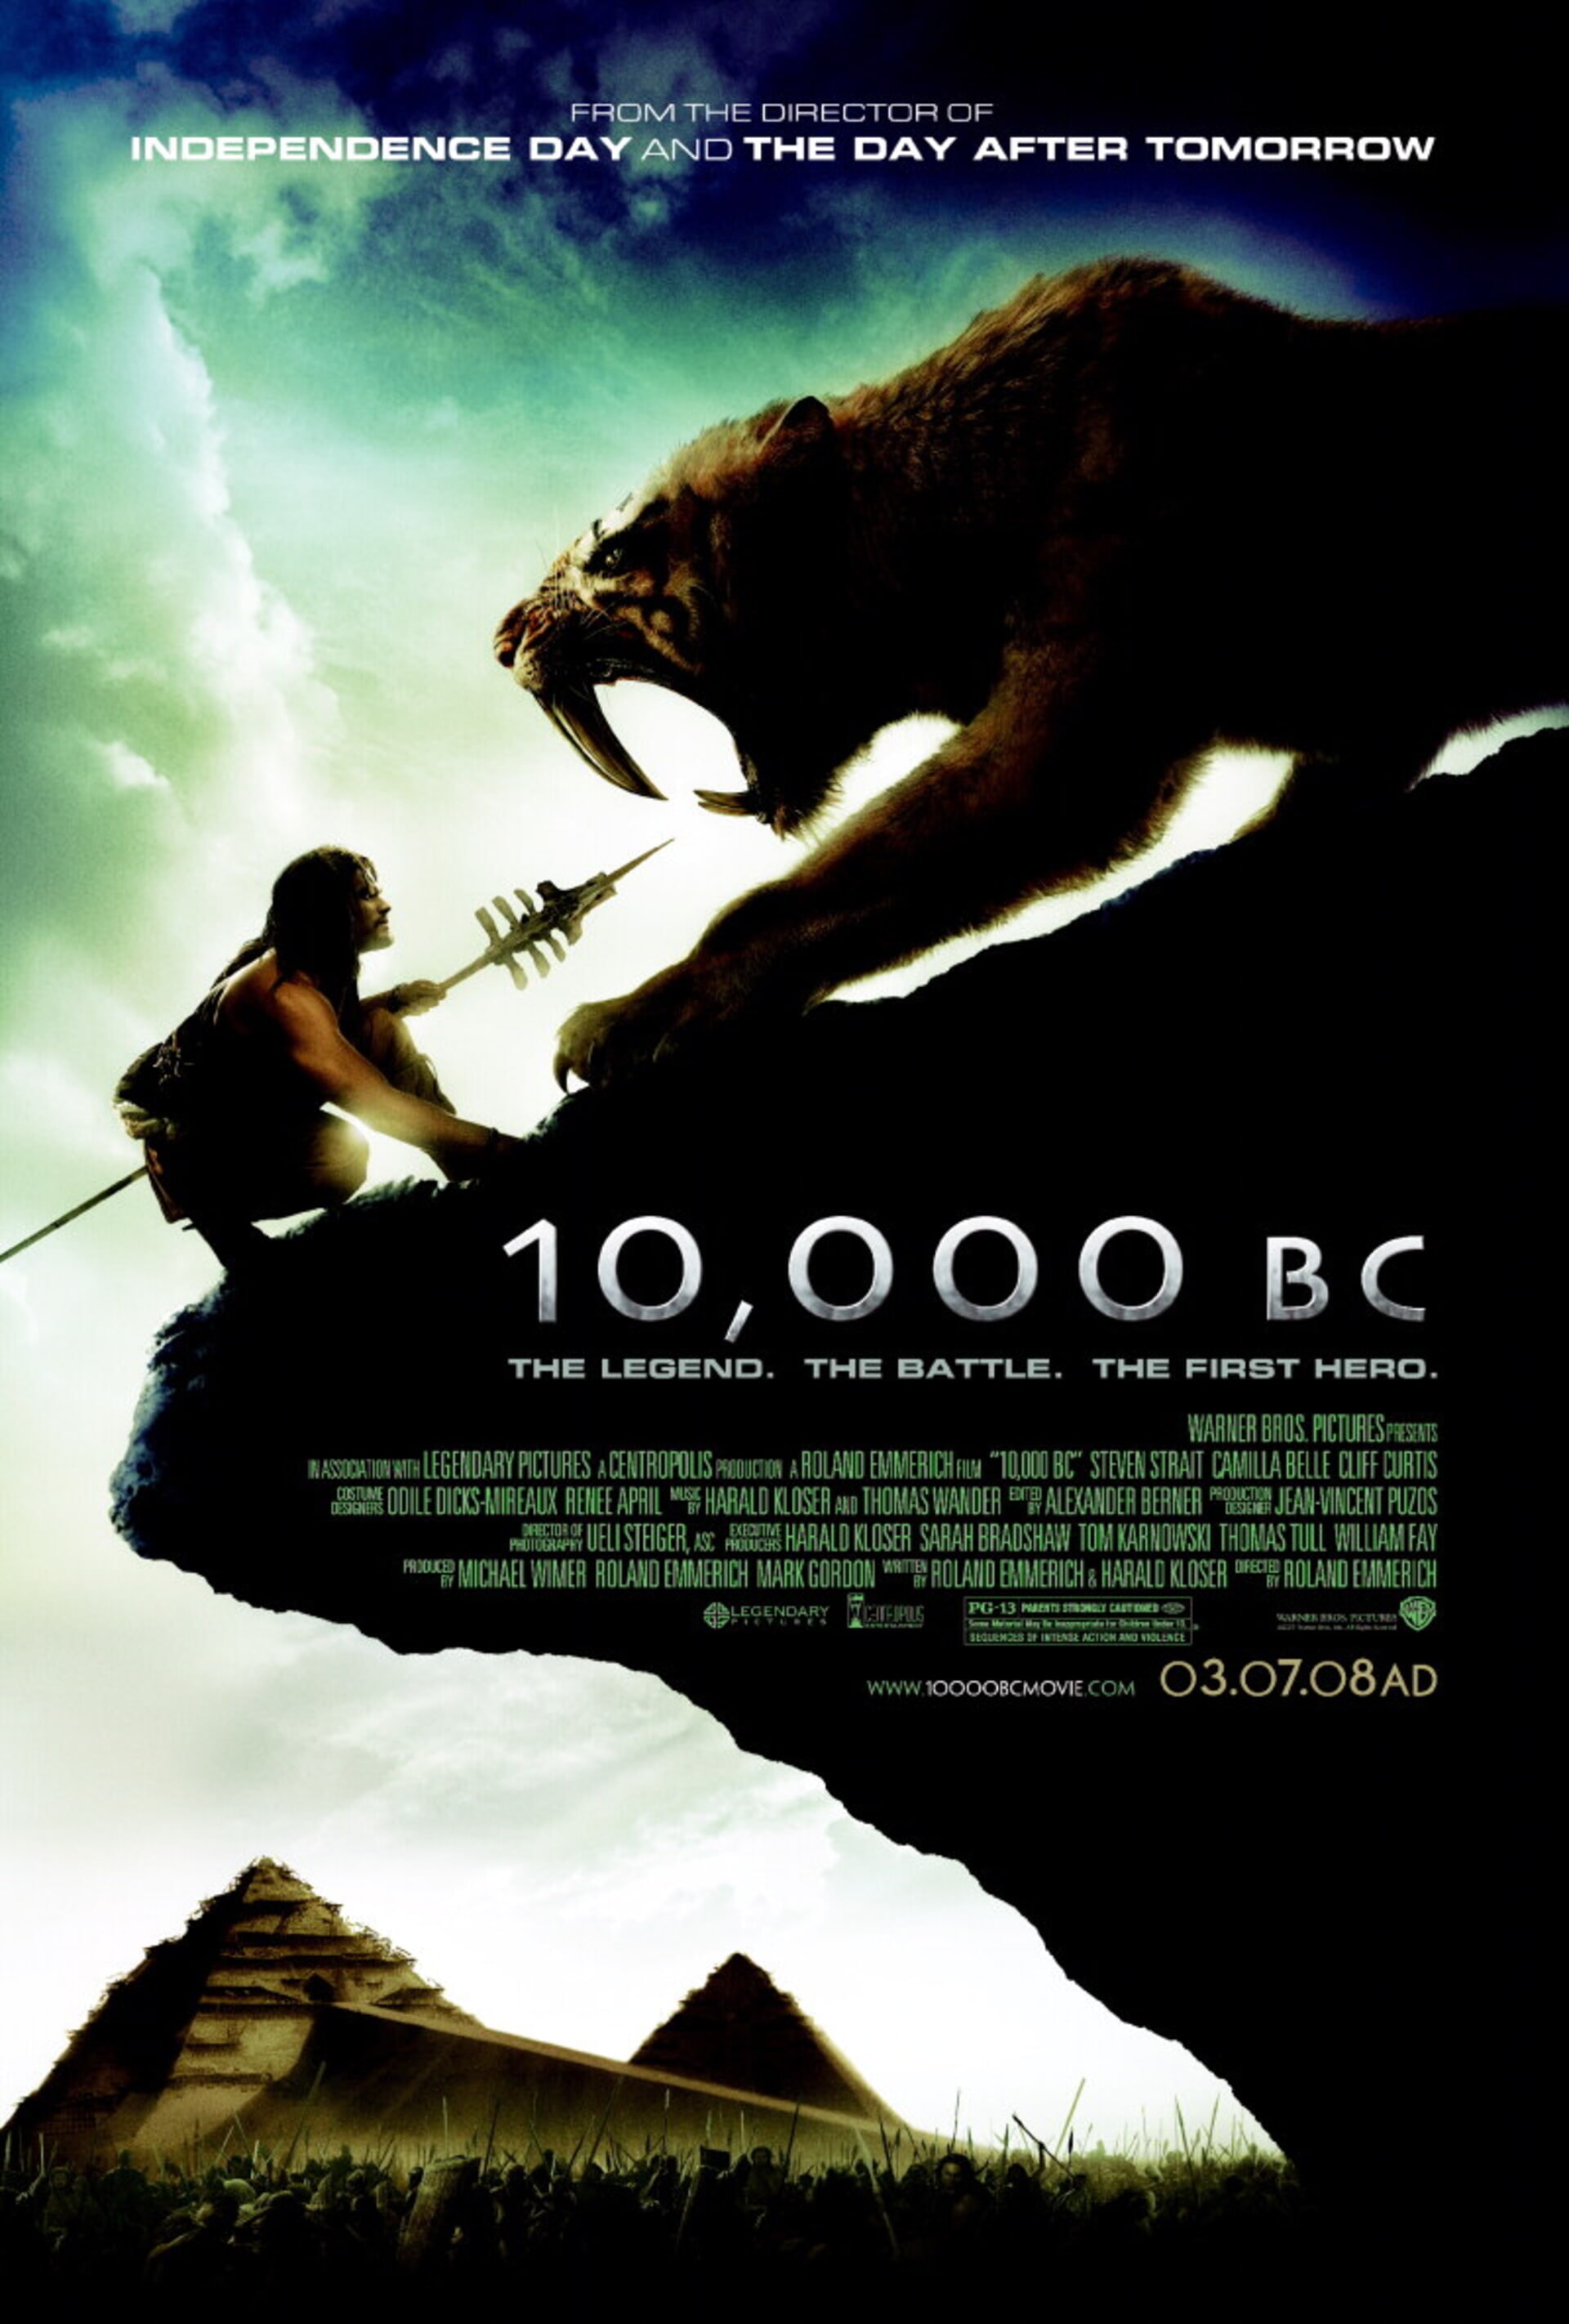 journey to 10000 bc history channel